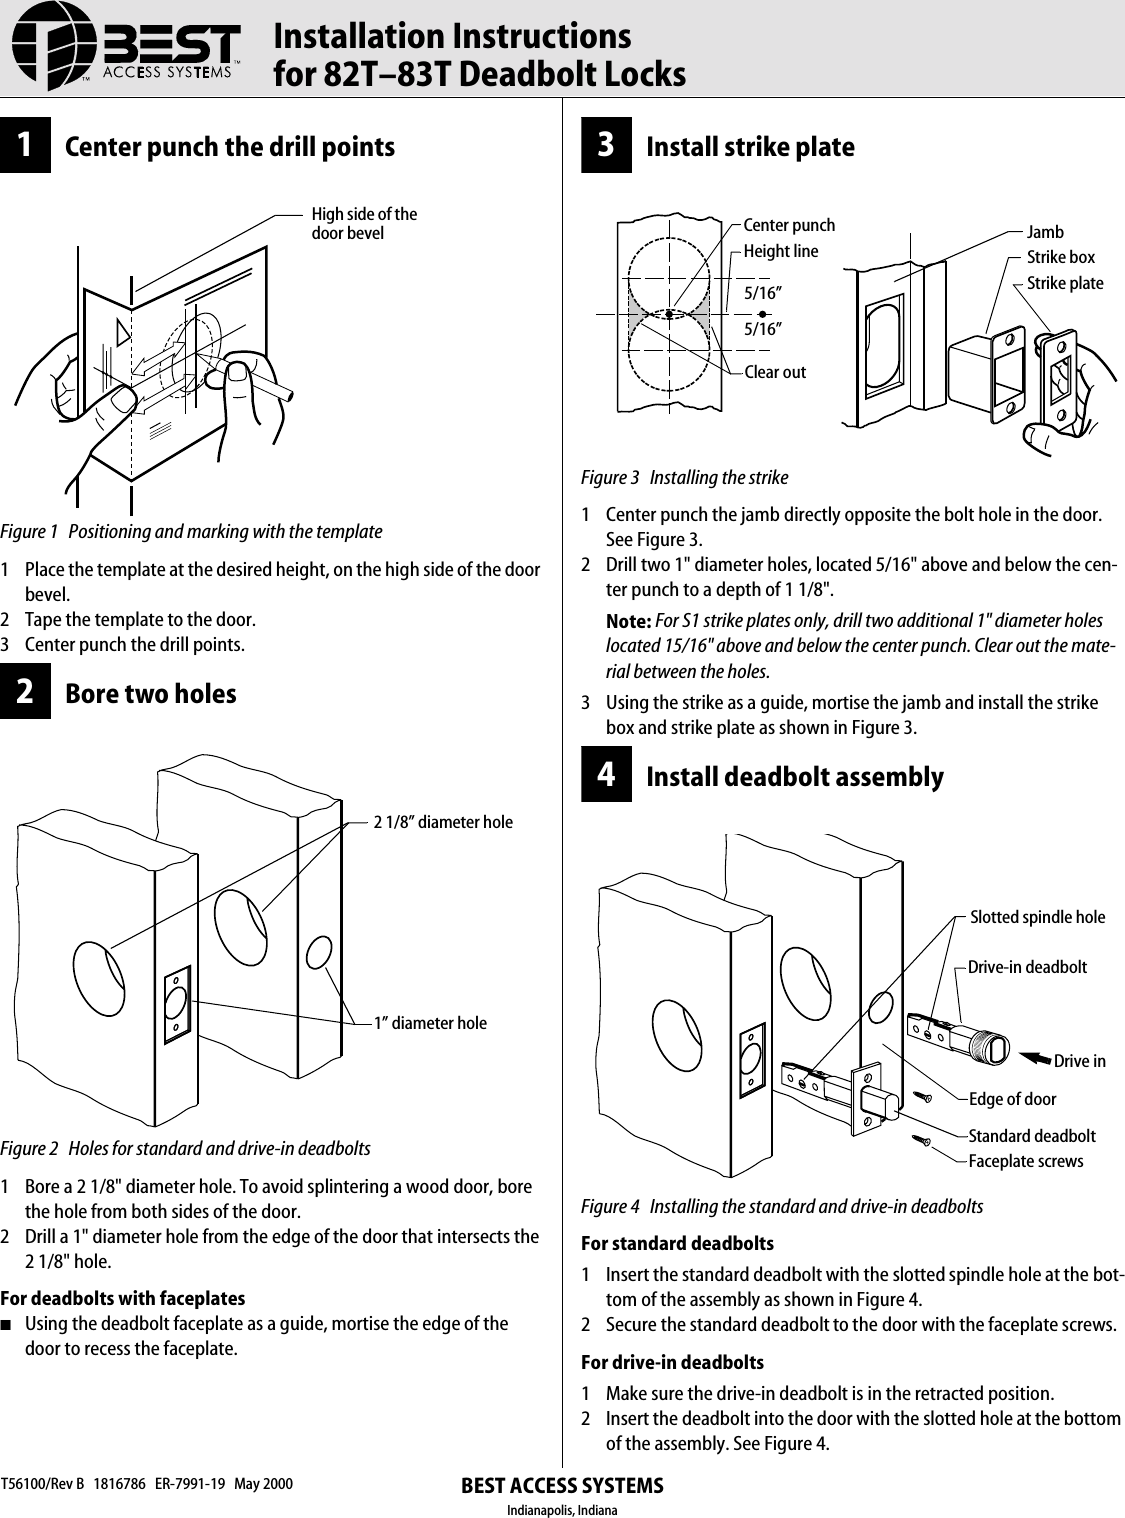 Page 1 of 2 - BEST Installation Instructions For 82T-83T Deadbolt Locks The 82T - 83T T56100b